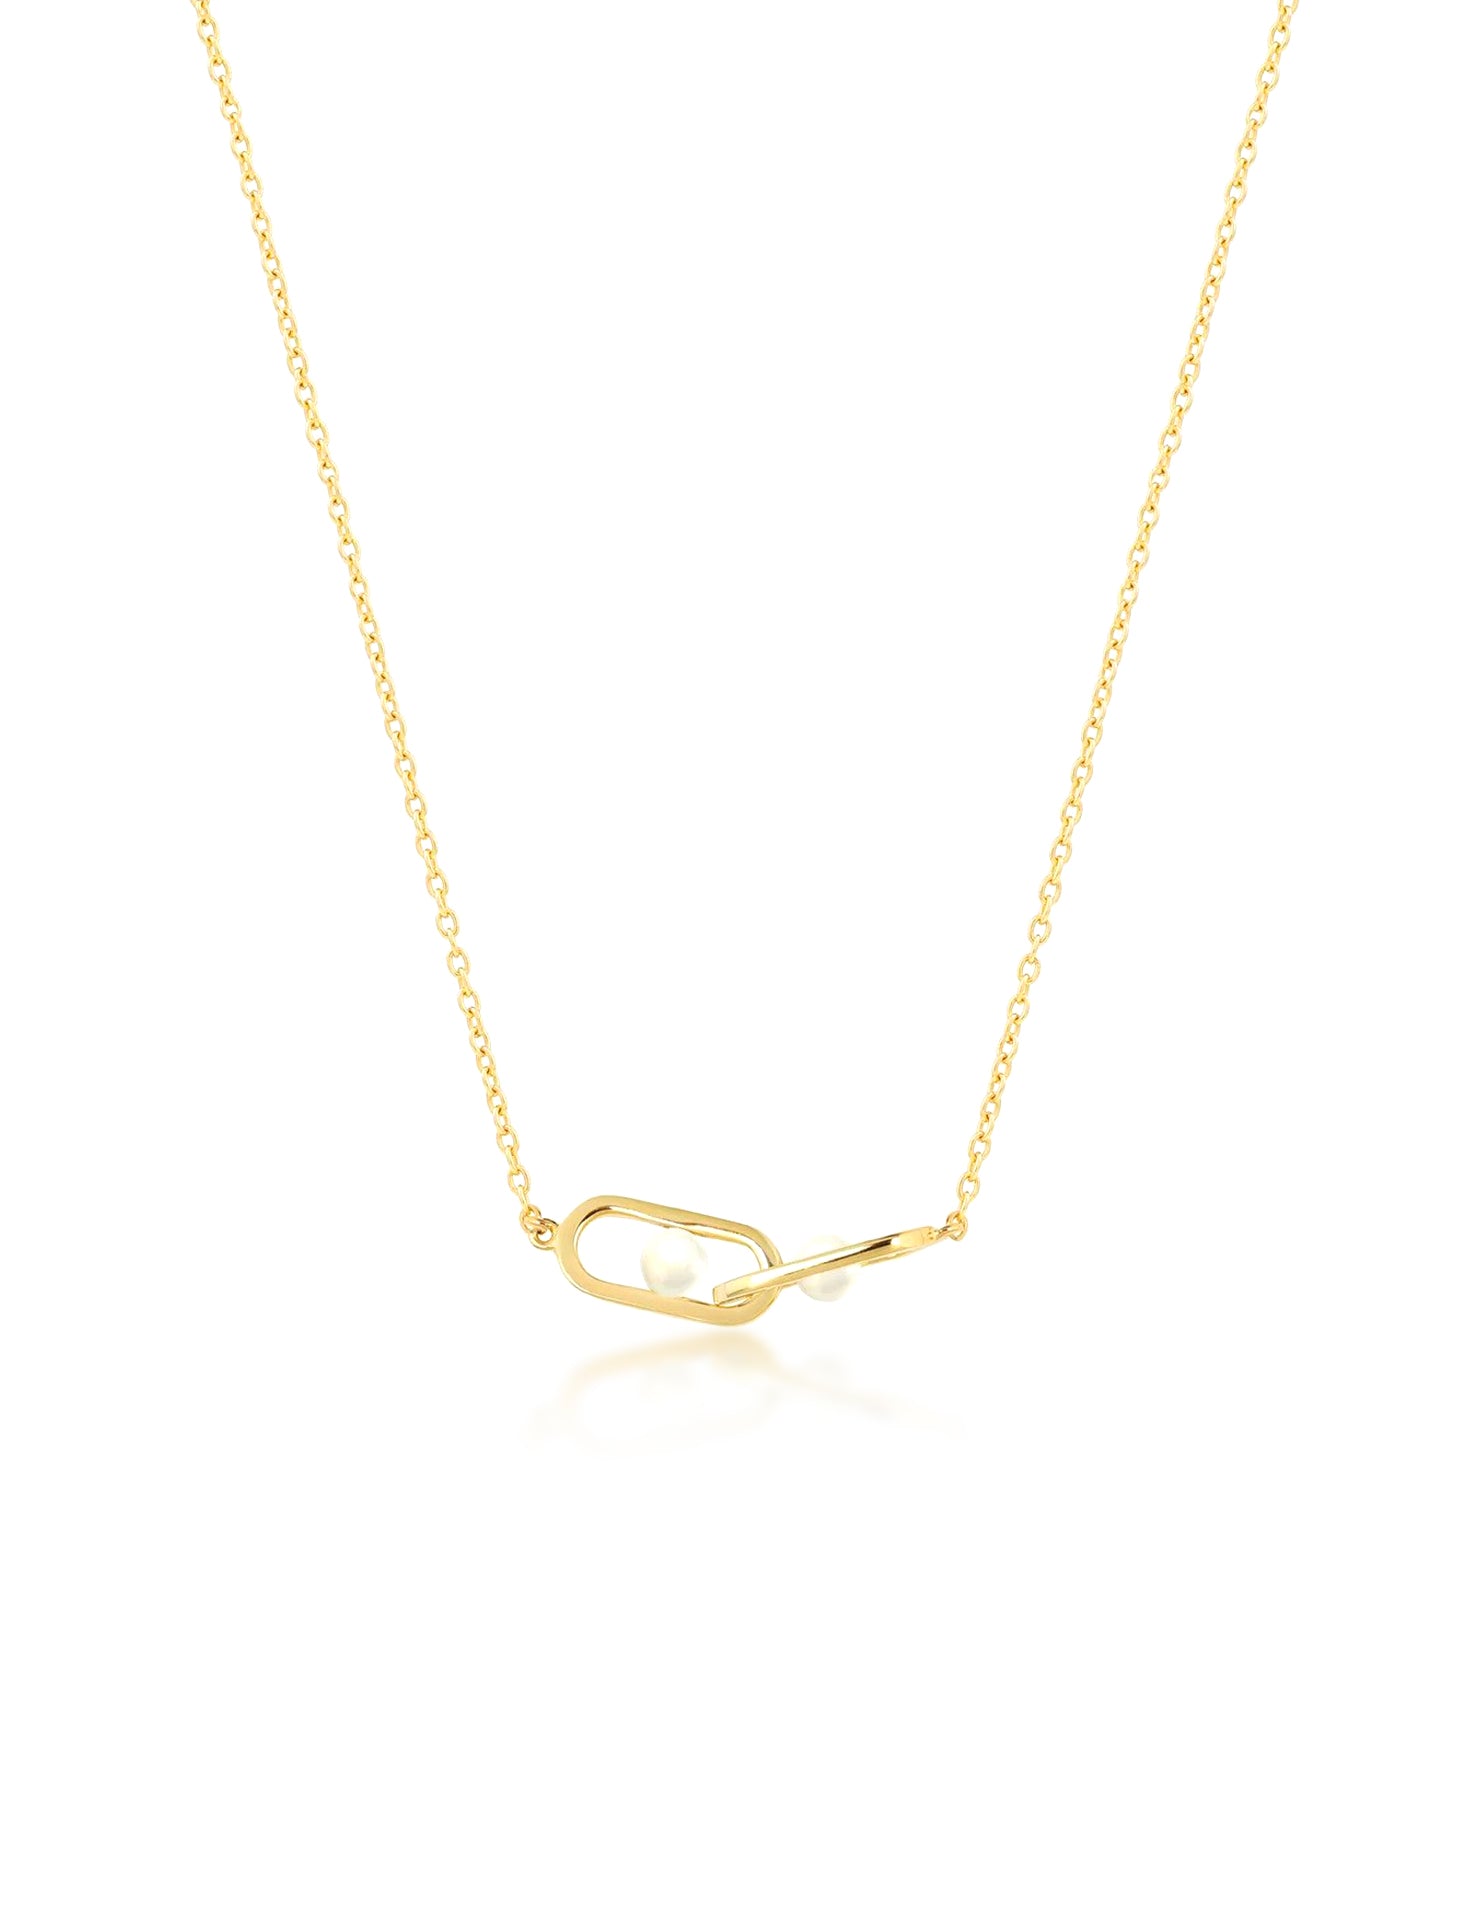 Inversion, 18K Yellow Gold + Akoya Pearl Necklace